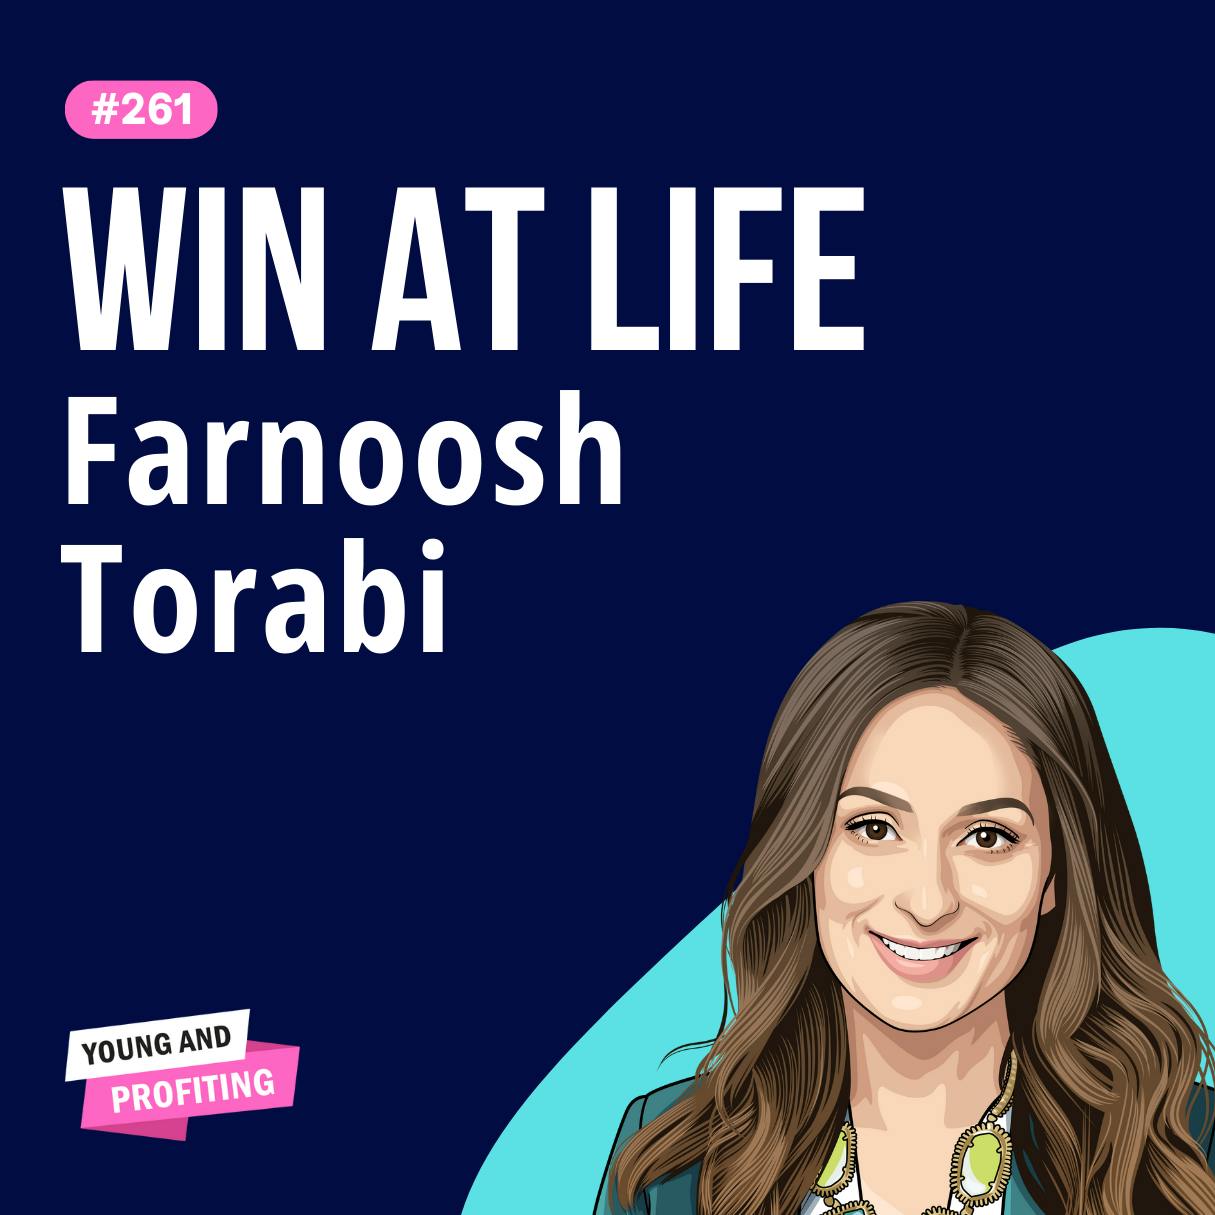 Farnoosh Torabi: A Healthy State of Panic, Harness Your Fears to Build Wealth and Crush Your Goals | E261 by Hala Taha | YAP Media Network